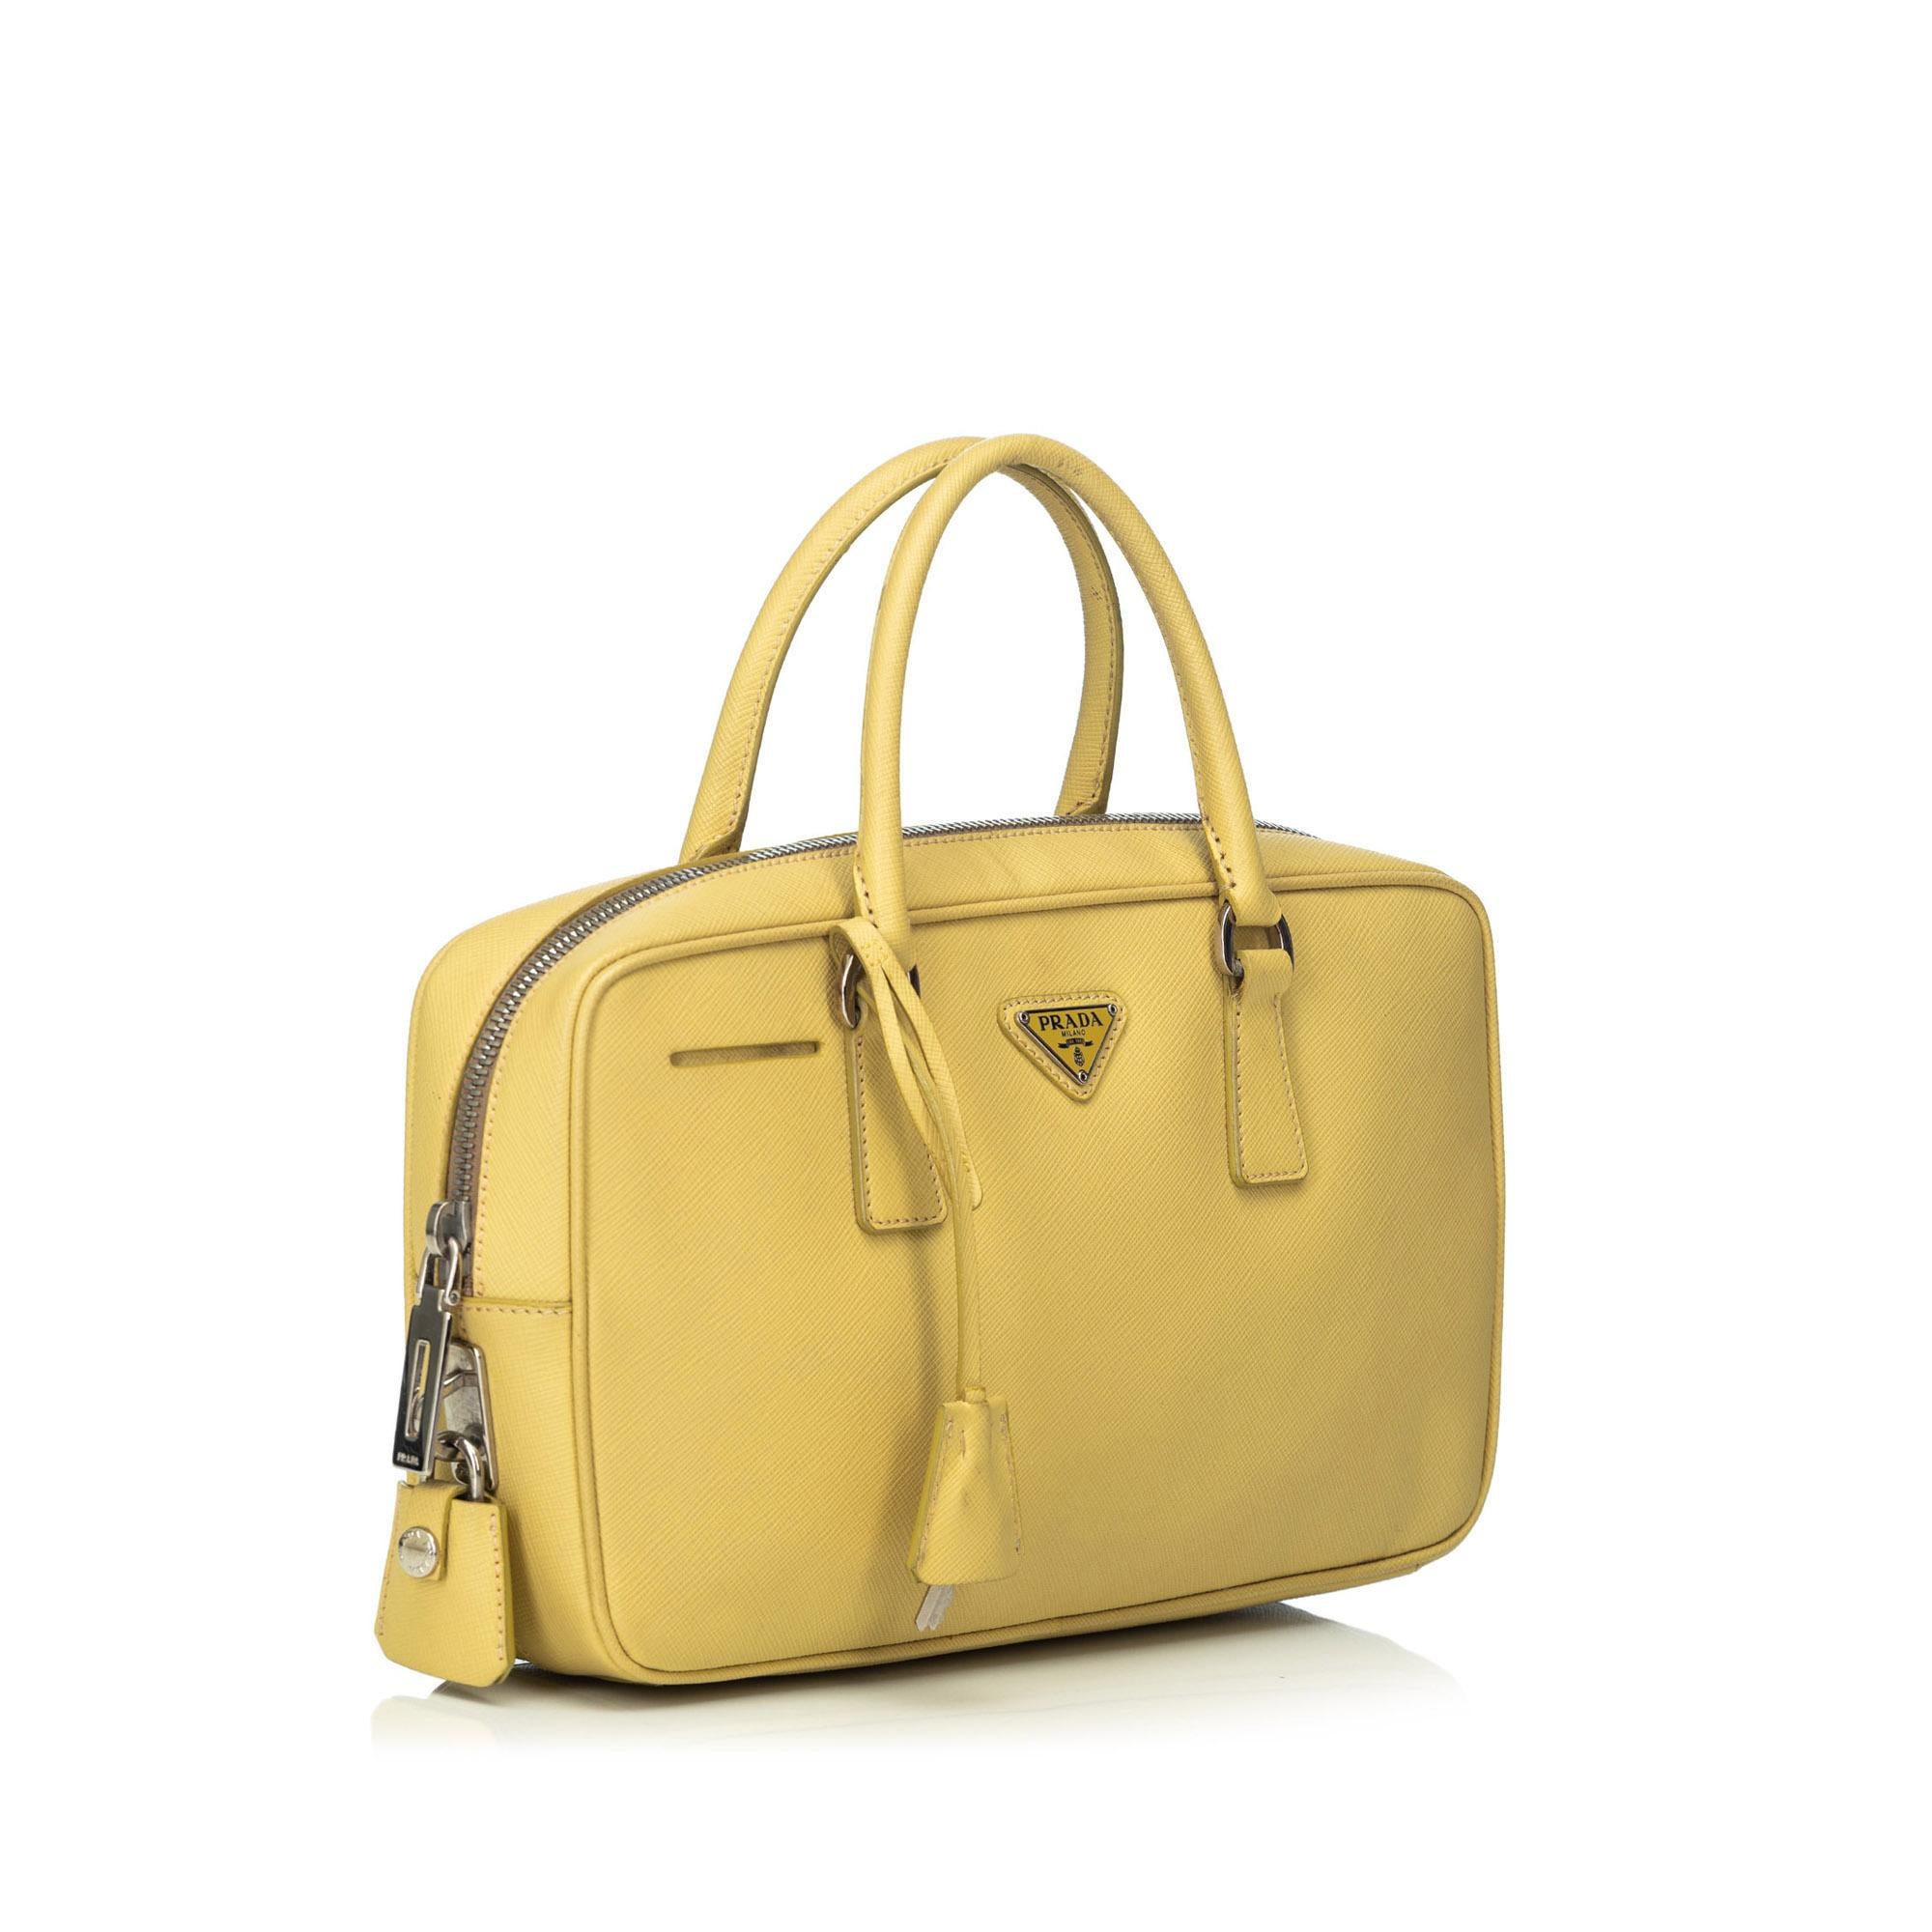 The Bauletto handbag features a saffiano leather body, rolled leather handles, a top zip closure, and an interior zip pocket. It carries as B+ condition rating.

Inclusions: 
Padlock
Key
Dimensions:
Length: 29.00 cm
Width: 16.00 cm
Depth: 6.00